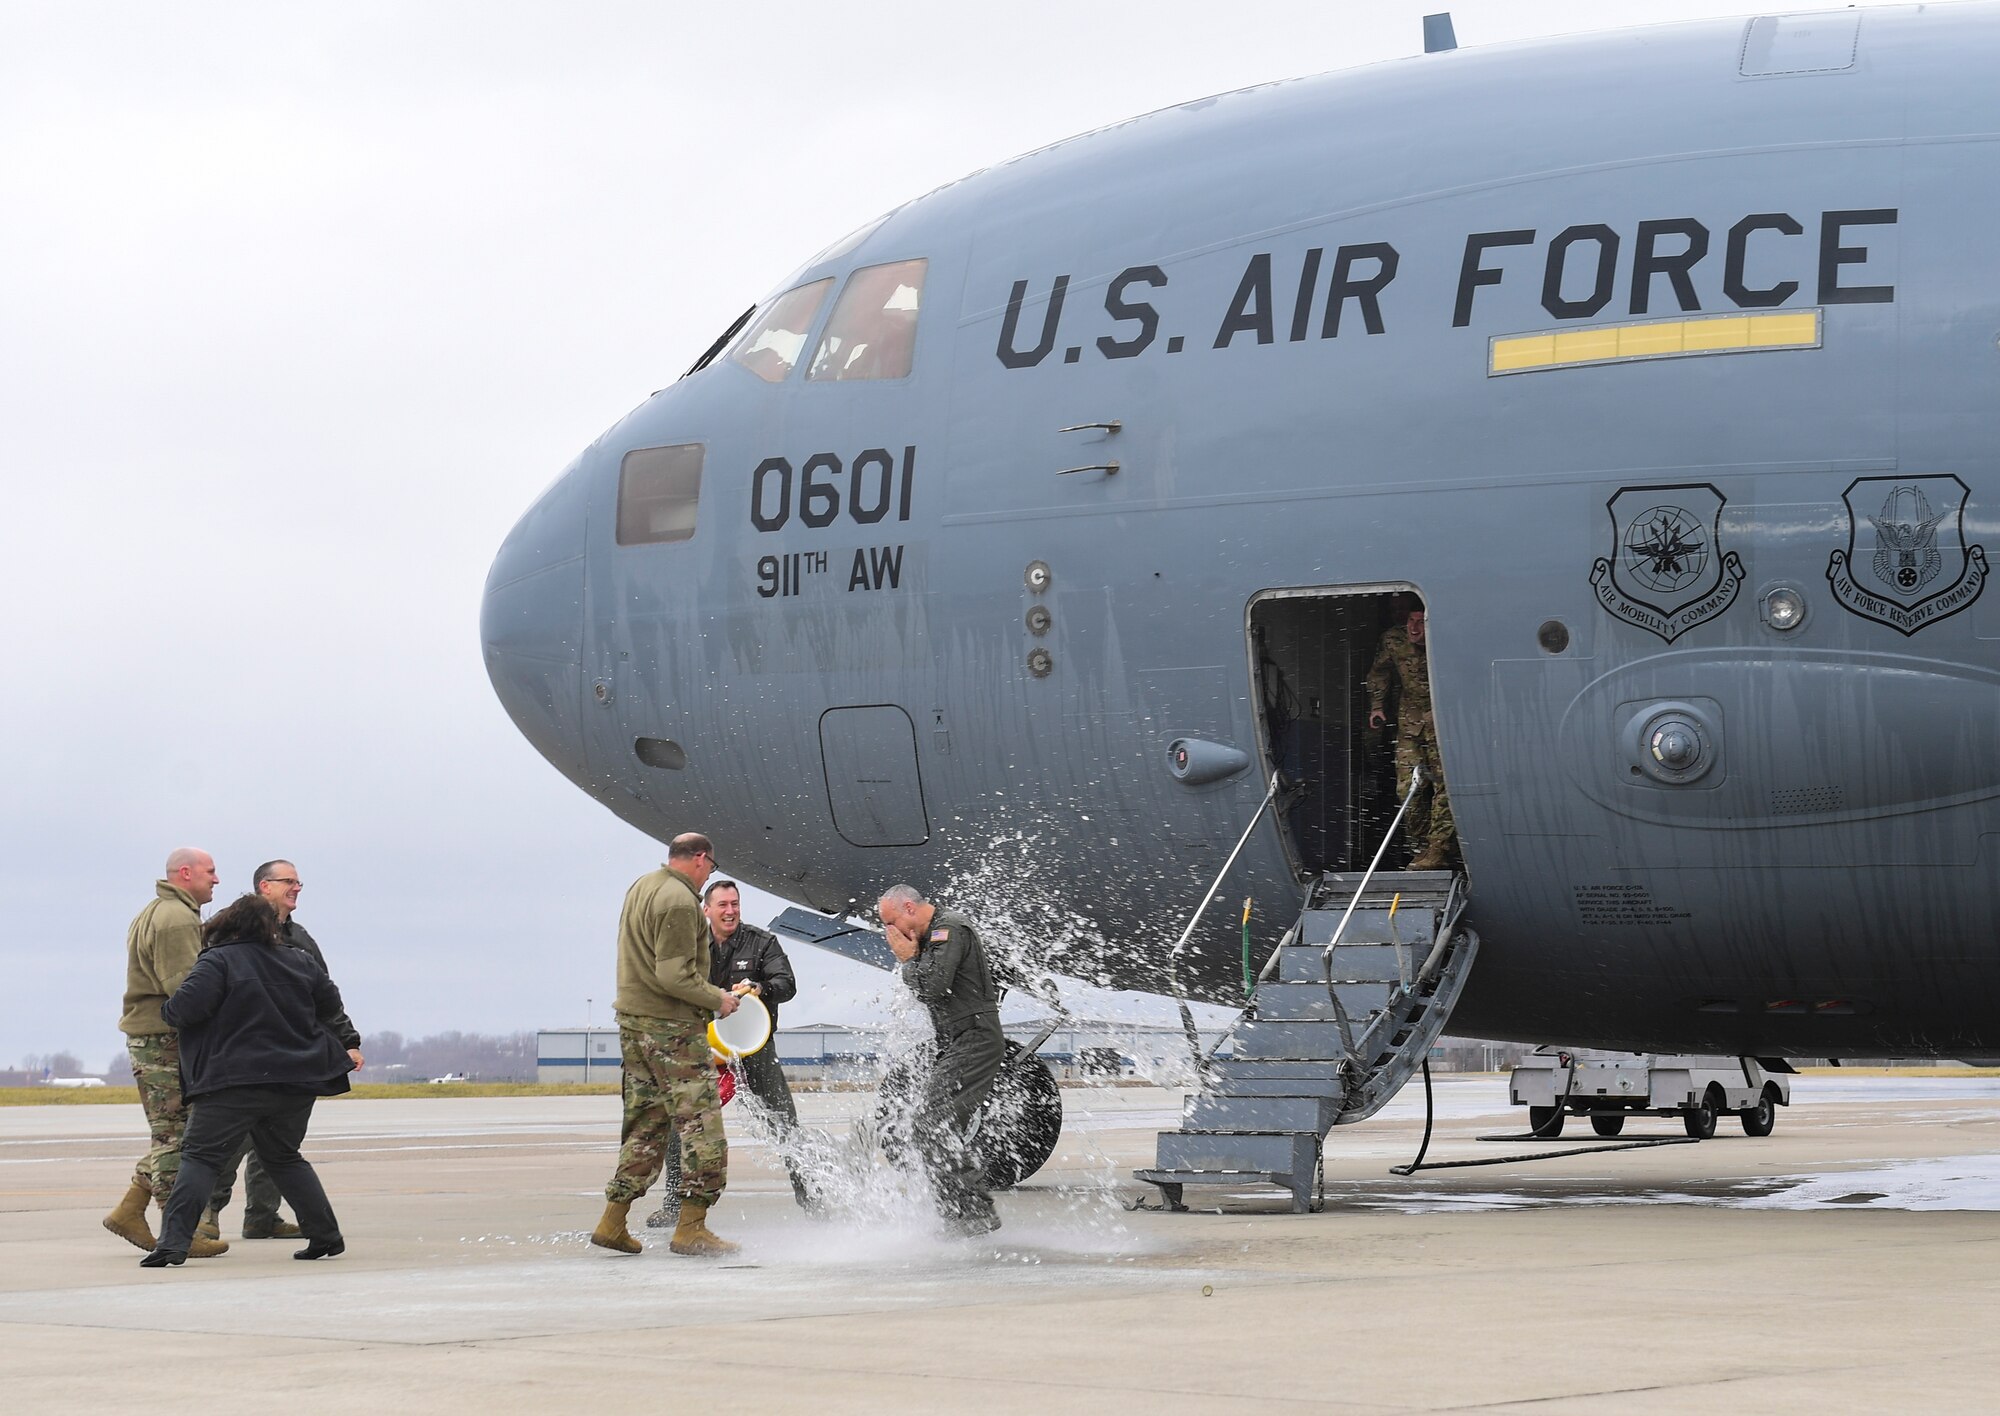 Col. Jay D. Miller, 911th Airlift Wing vice commander, is drenched in water upon returning from his fini-flight at the Pittsburgh International Airport Air Reserve Station, Pennsylvania, Jan. 12, 2020. This was Millers’s final flight as the vice commander of the 911th AW.